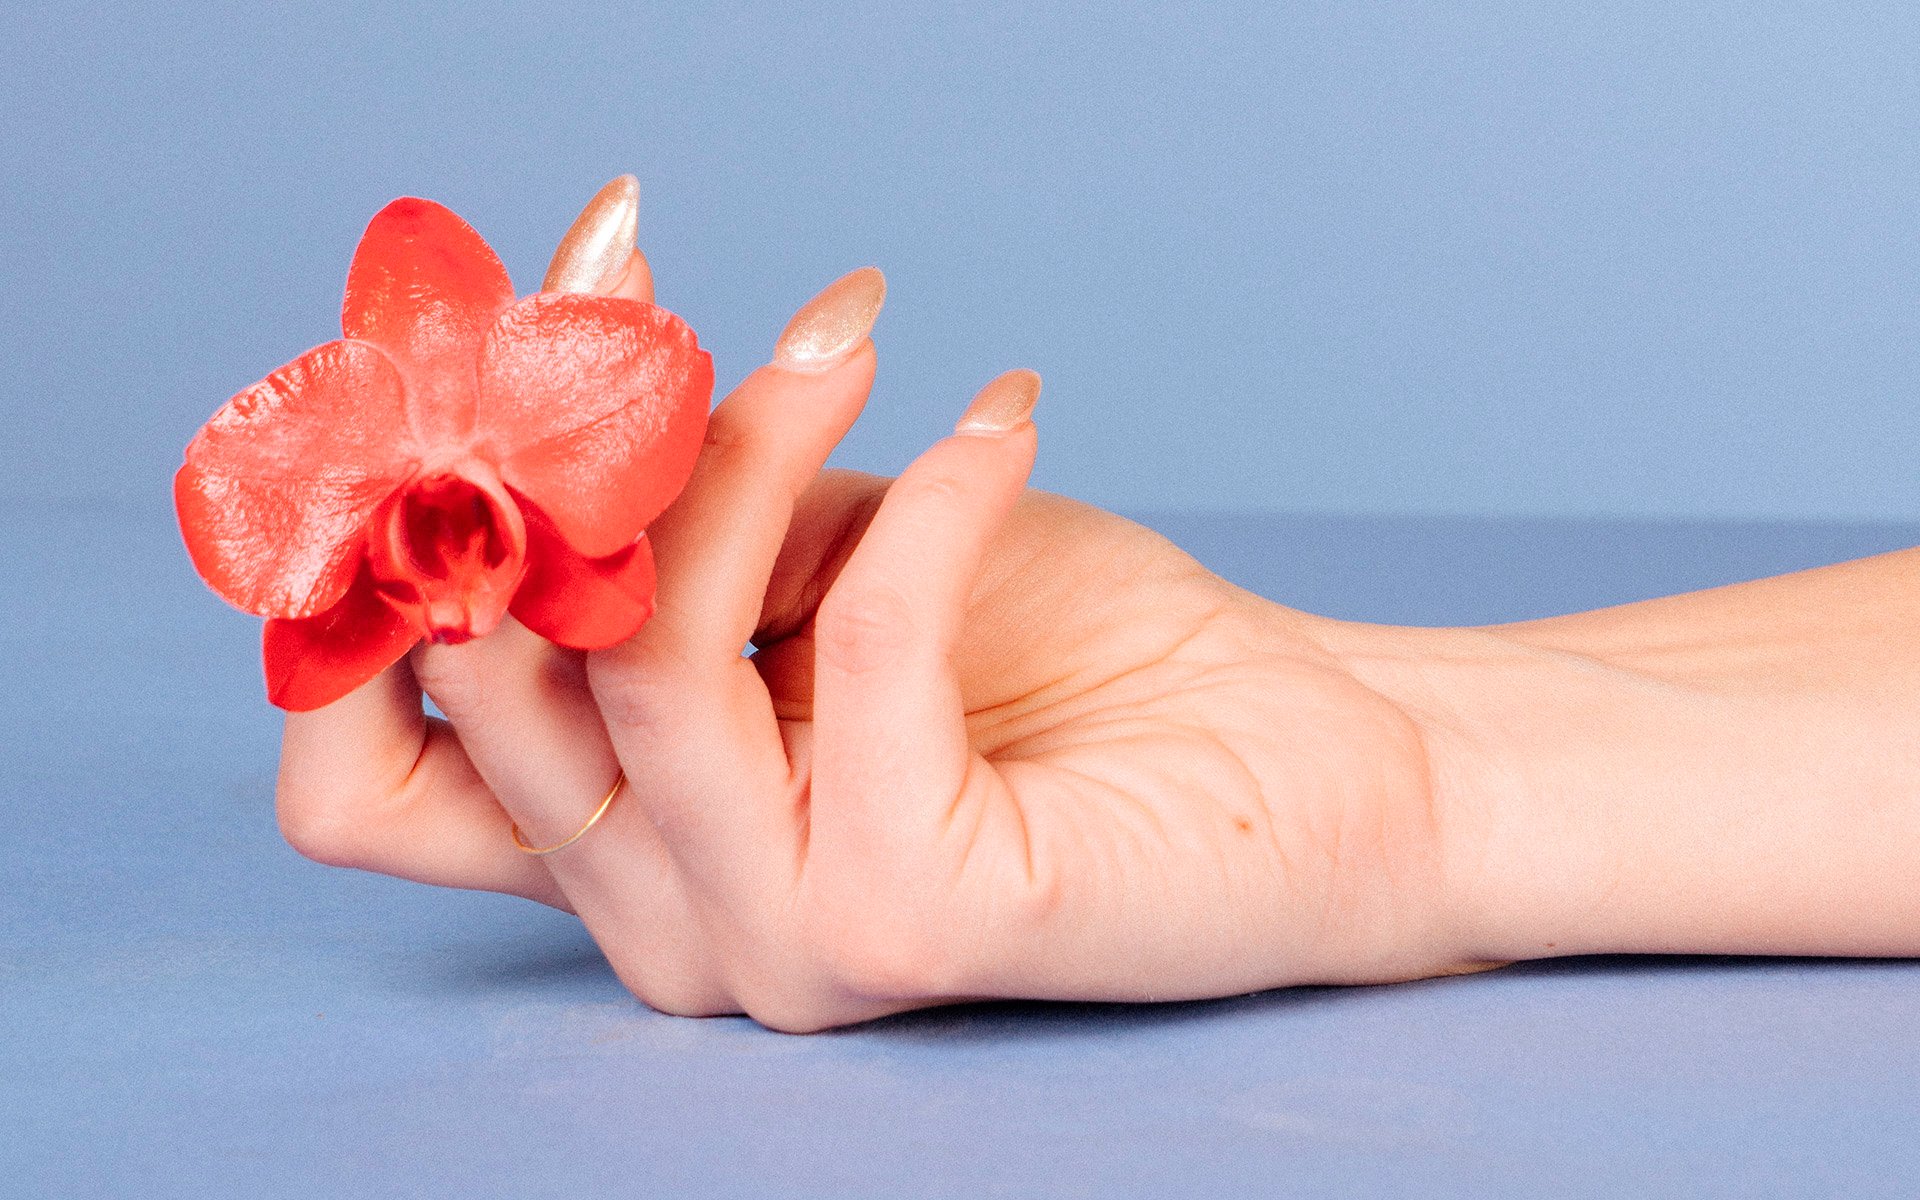 A hand loosely holding a red flower in its fingers